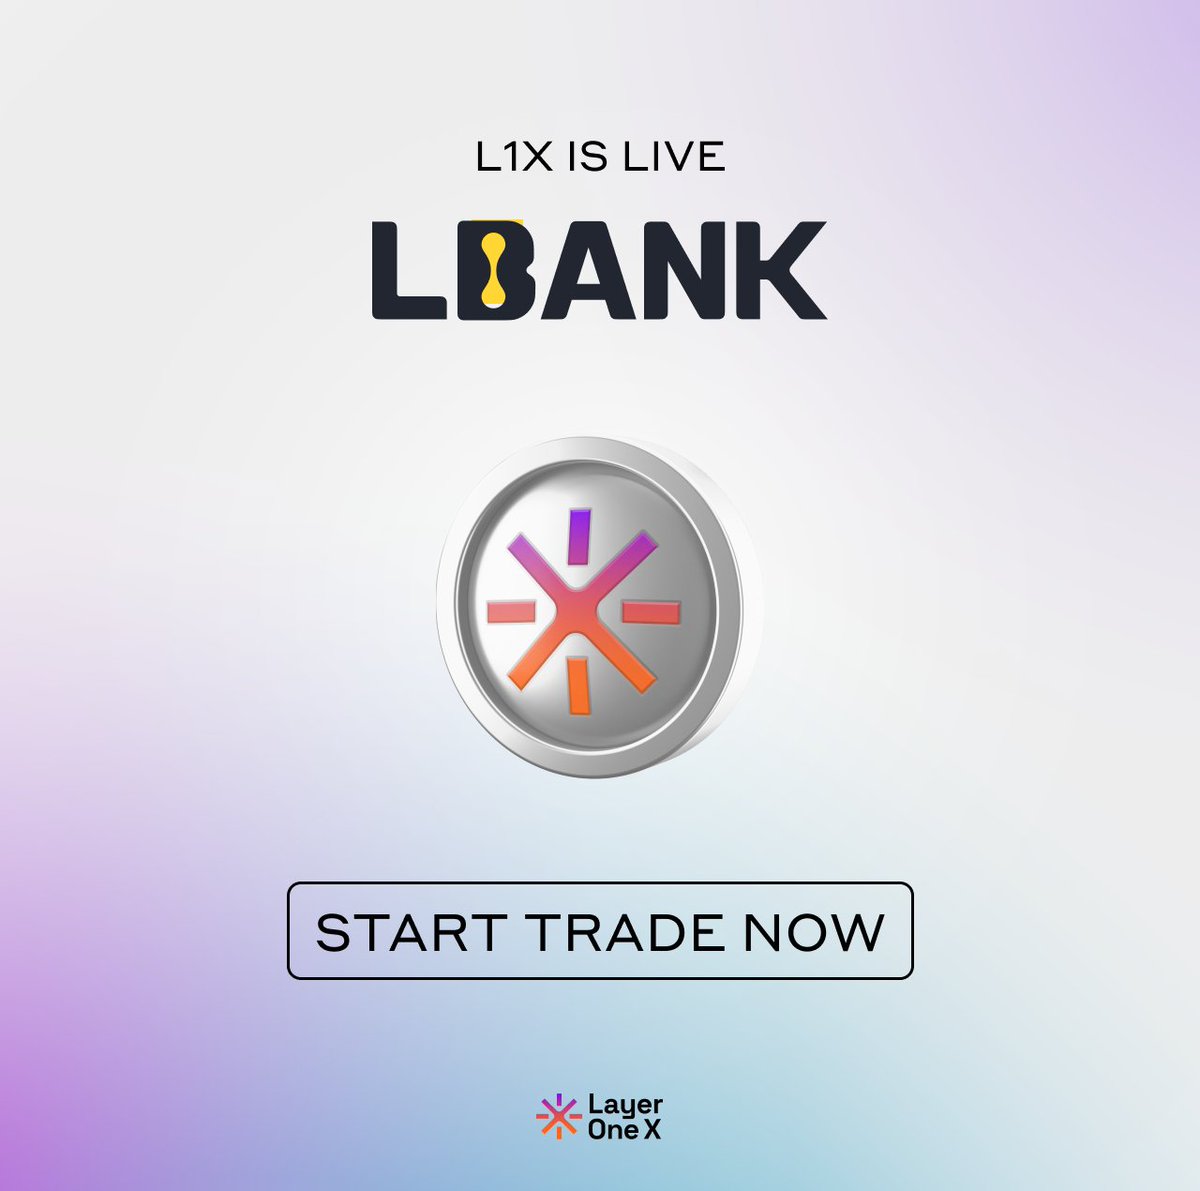 Ready to start trading your L1X Coins?
We're live at @LBank_Exchange  🔥 #Crypto #L1X

Start Trade Now: lbank.com/trade/l1x_usdt